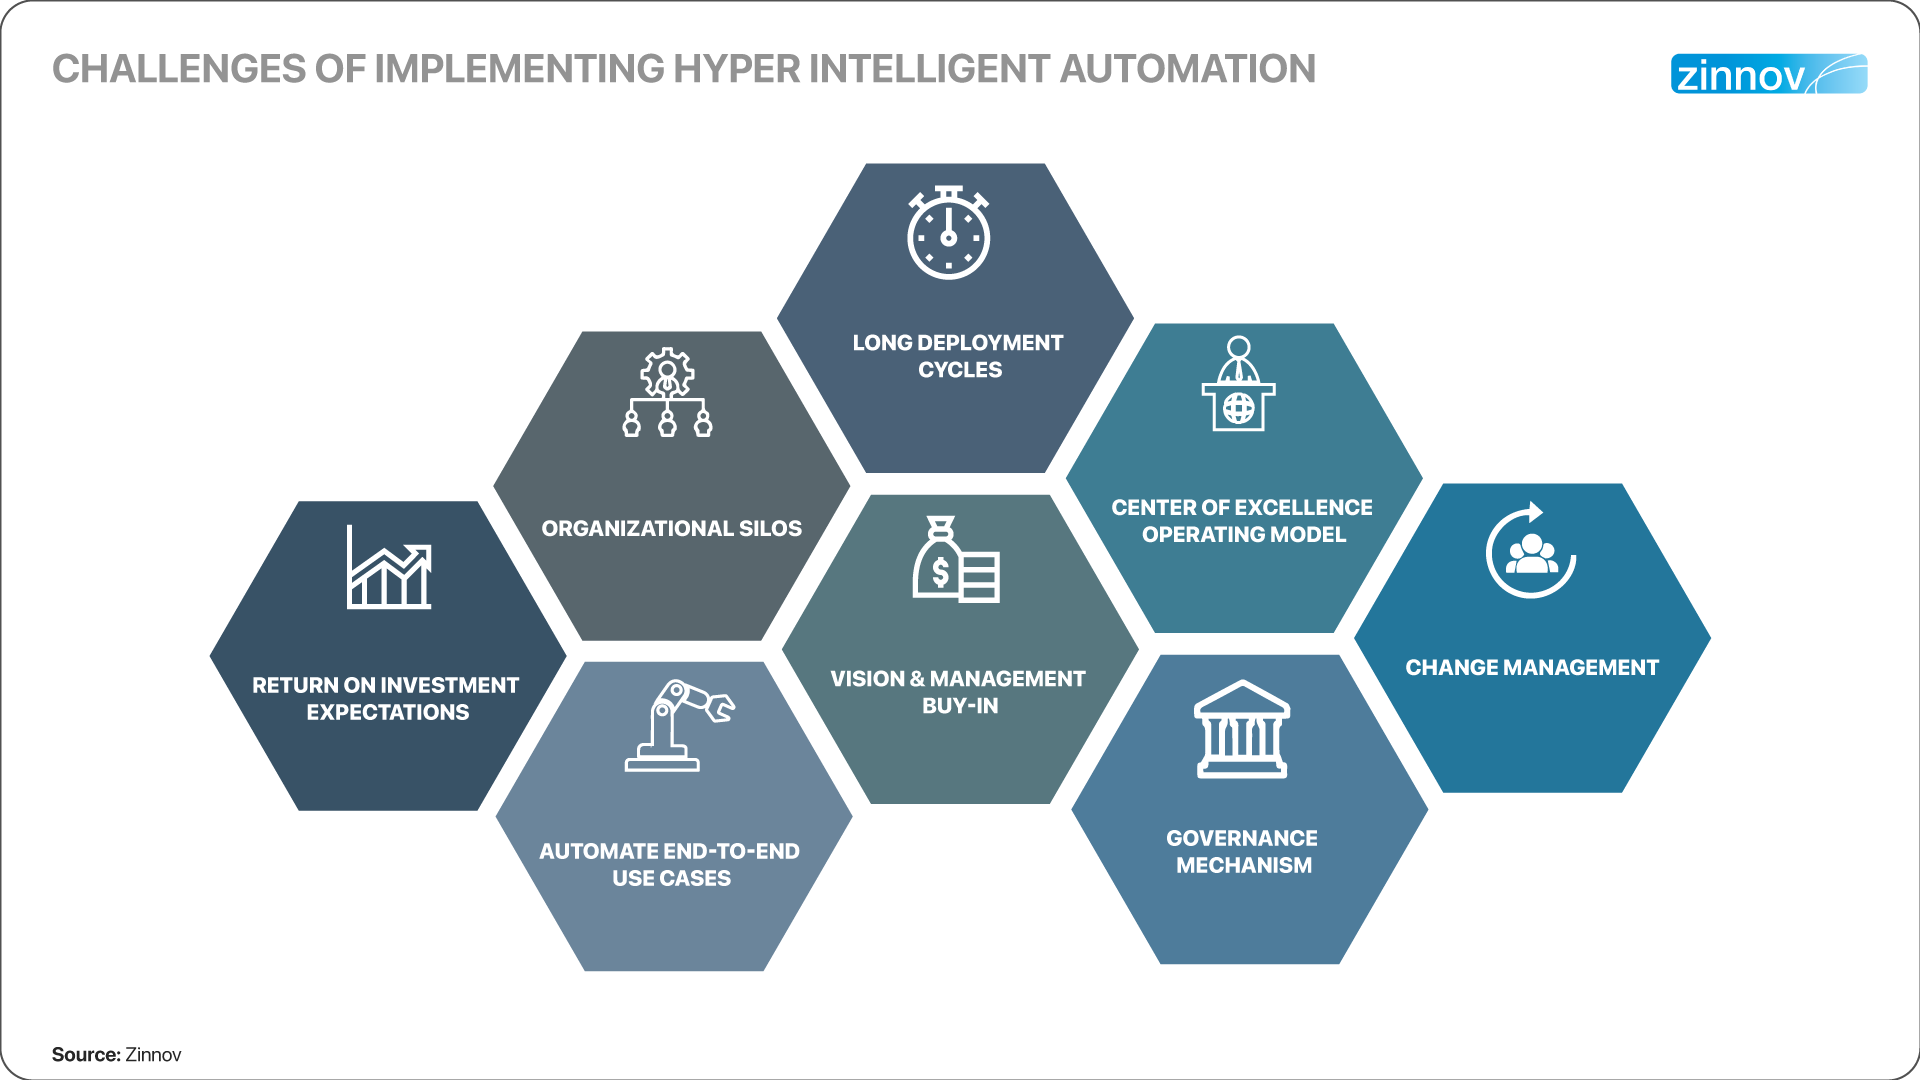 Challenges of implementing Hyper Intelligent Automation